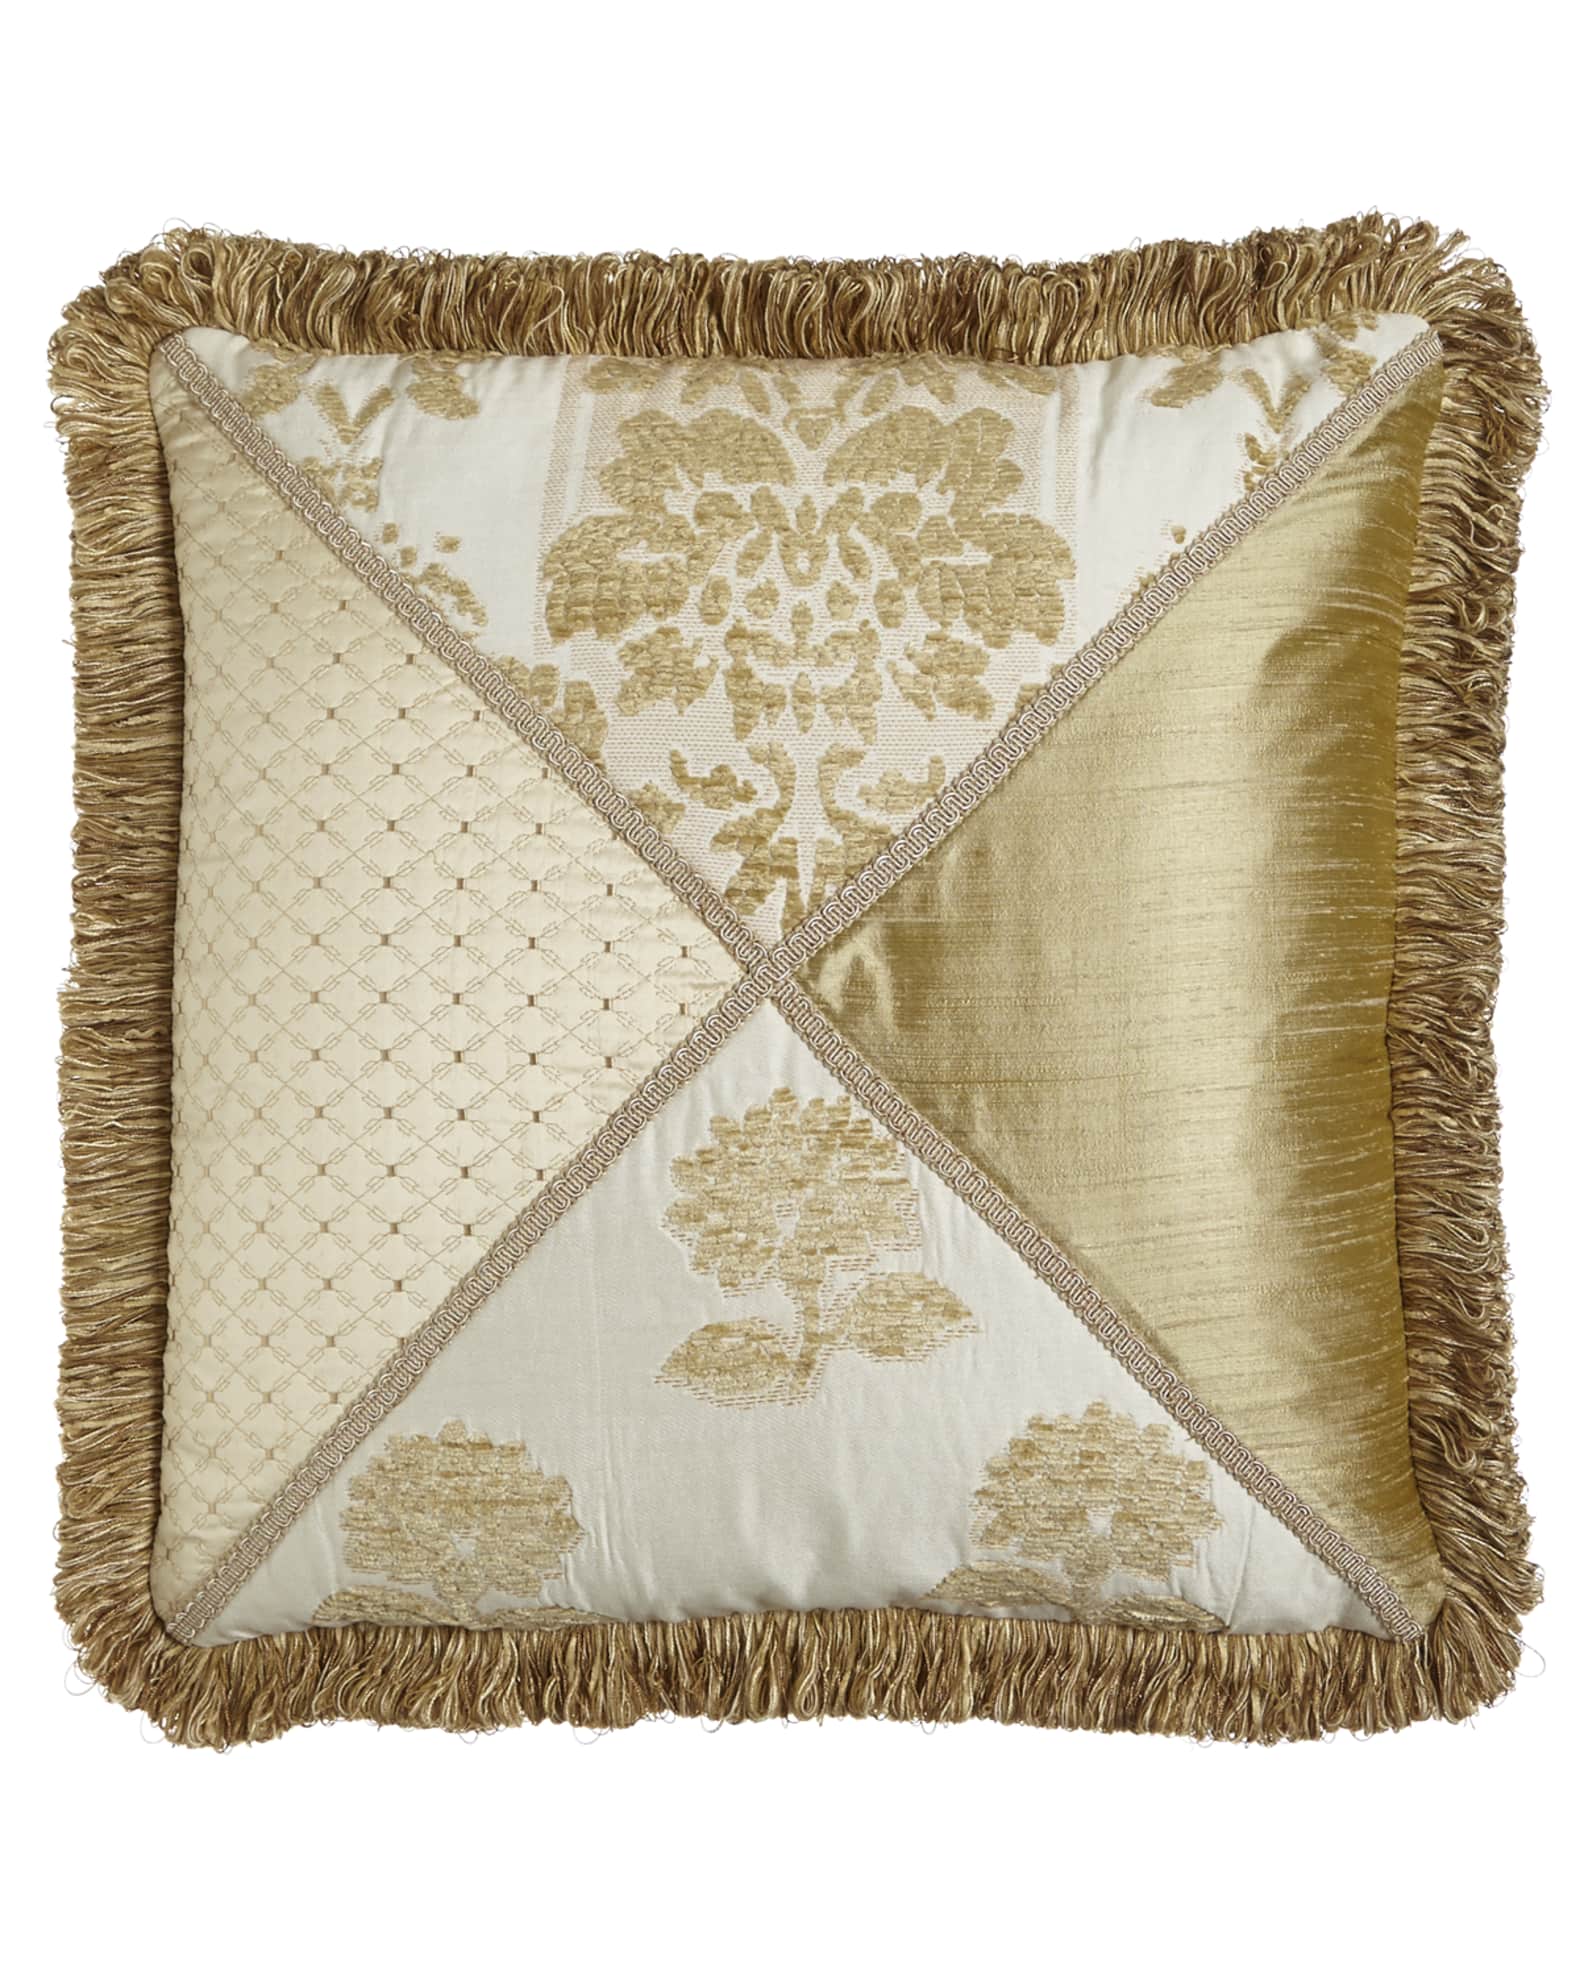 Antoinette Pieced Pillow with Loop Fringe, 20"Sq. 0